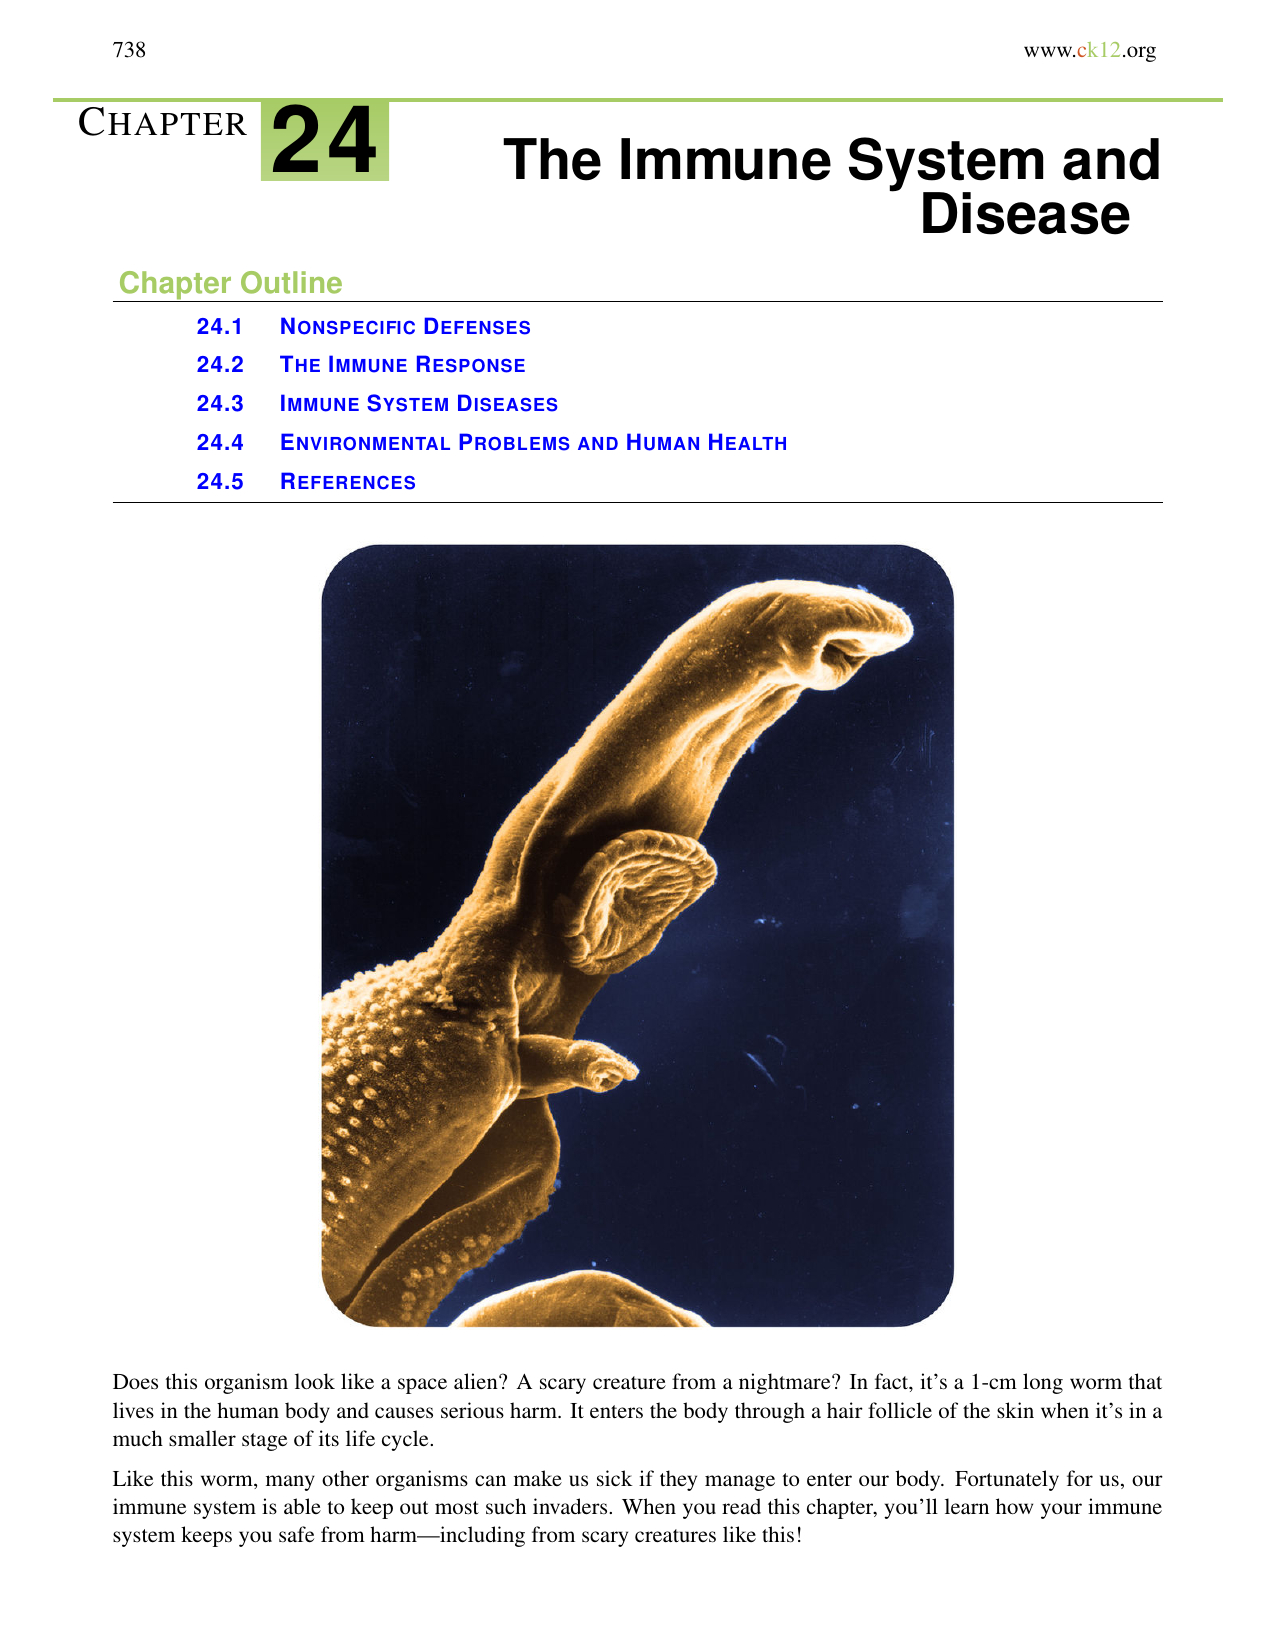 Chapter 24 The Immune System And Disease